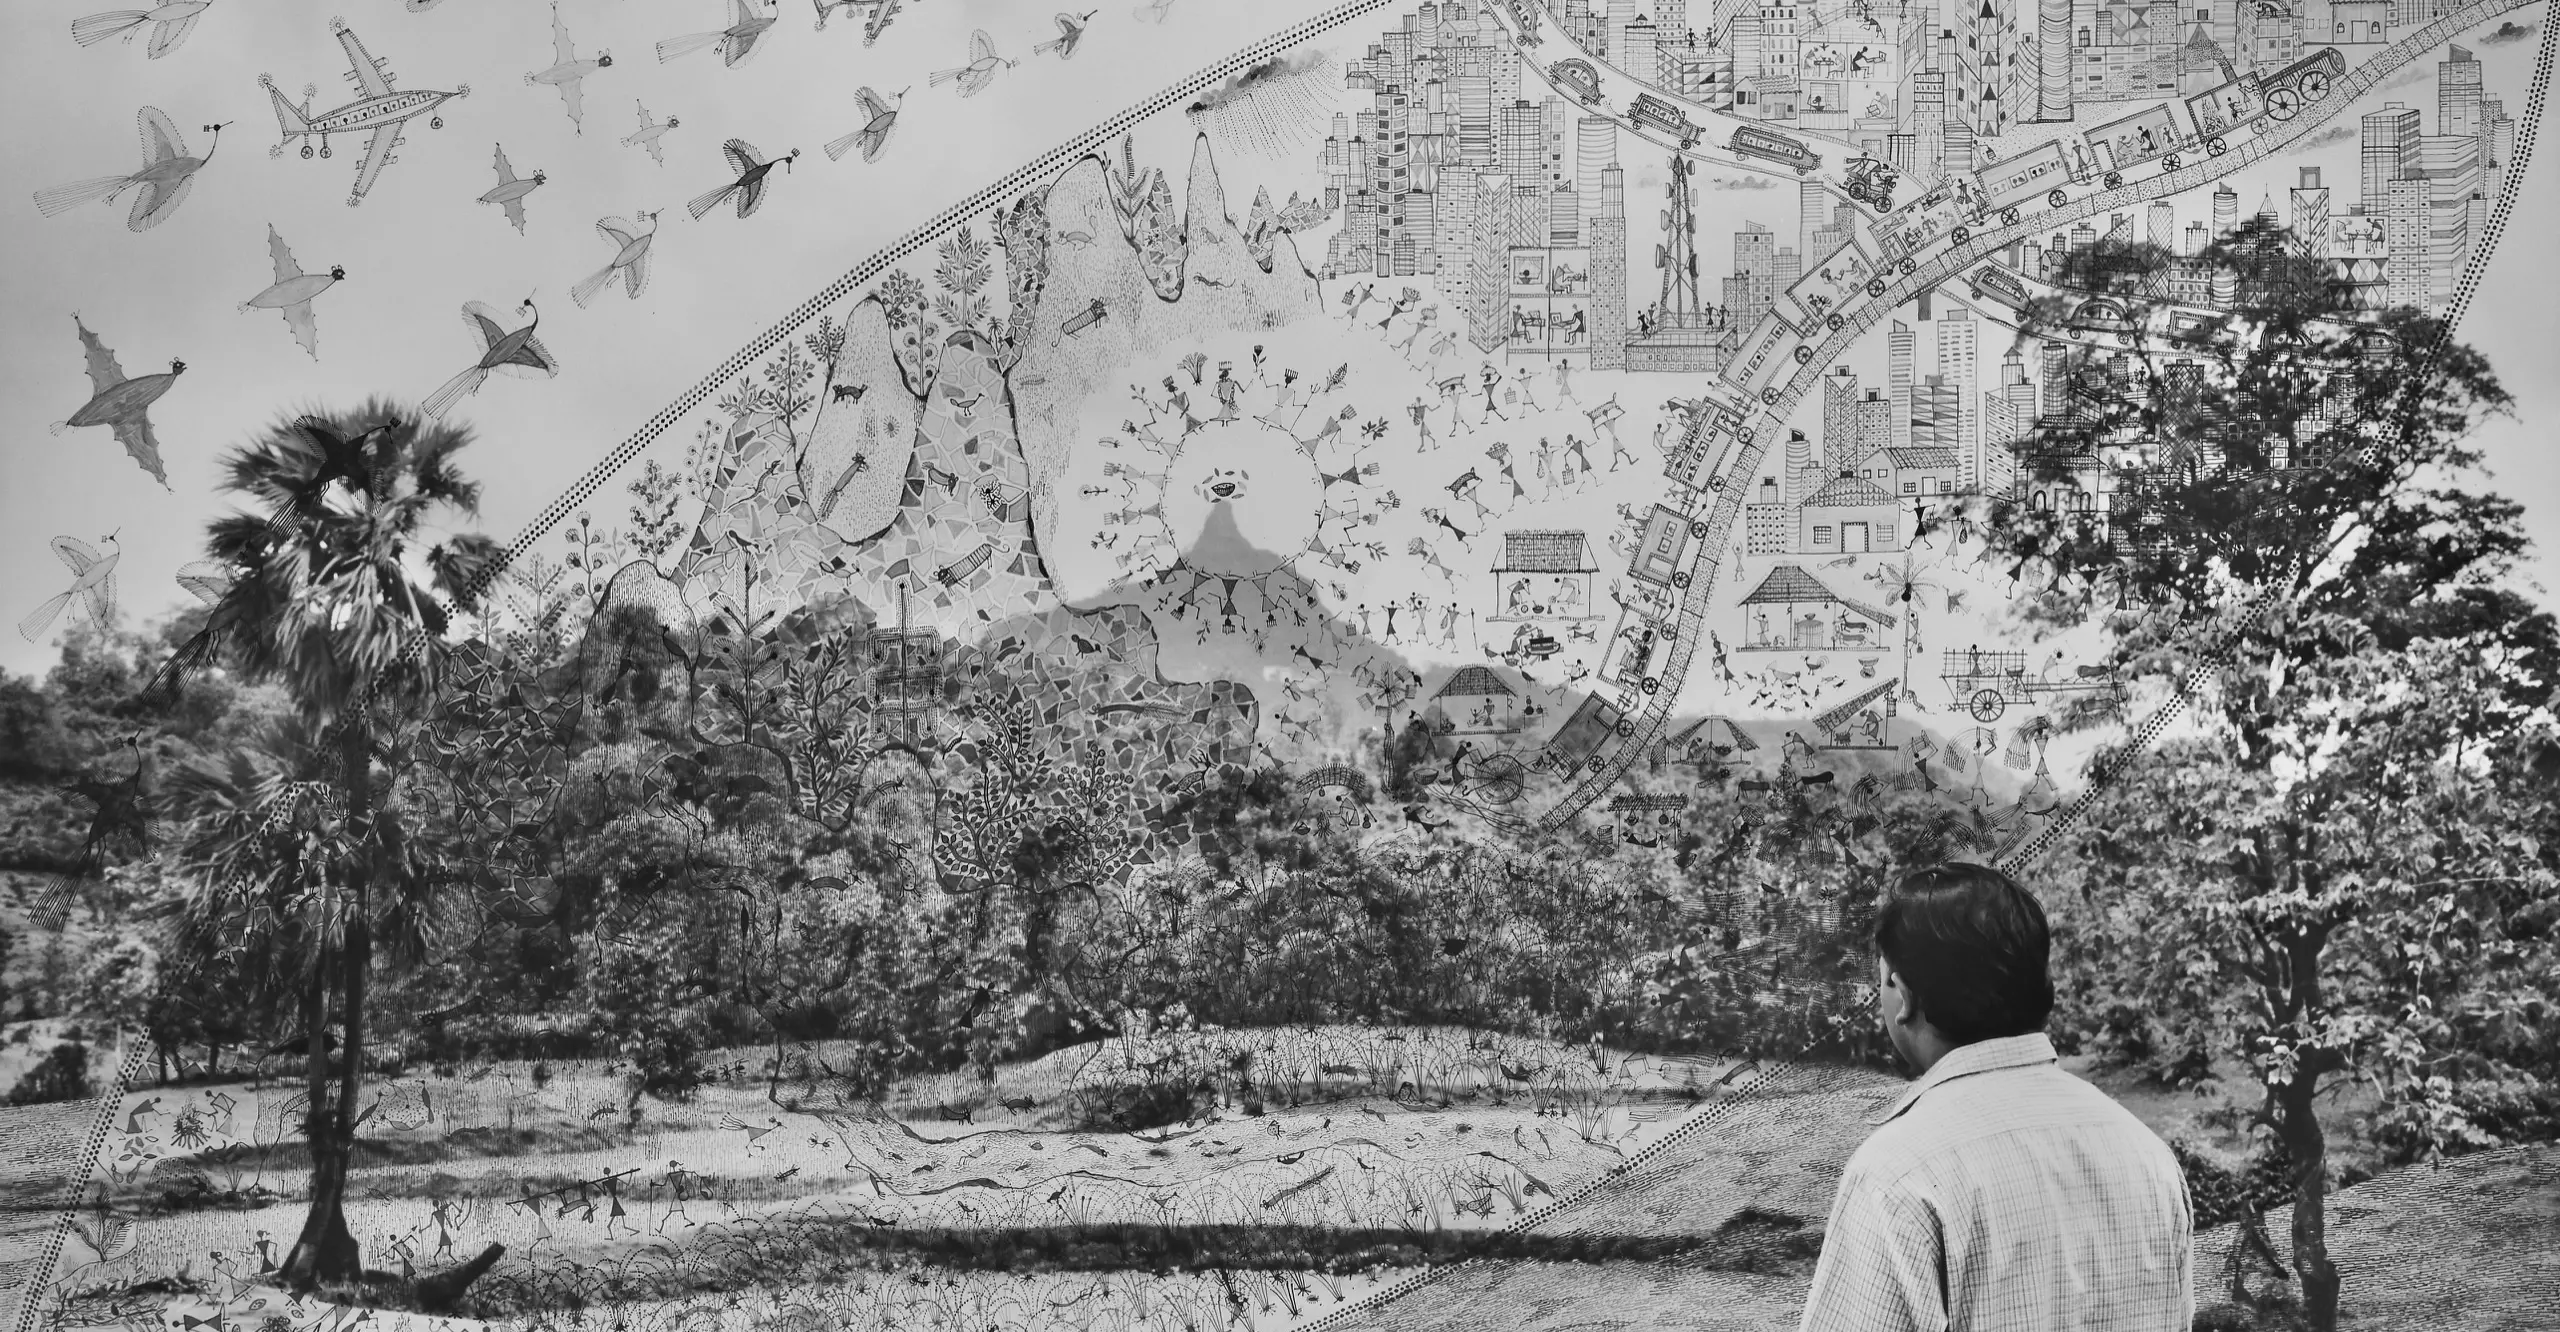  Black and white photograph of a person with their back turned, looking out to a forest, layered with Warli drawings over the image